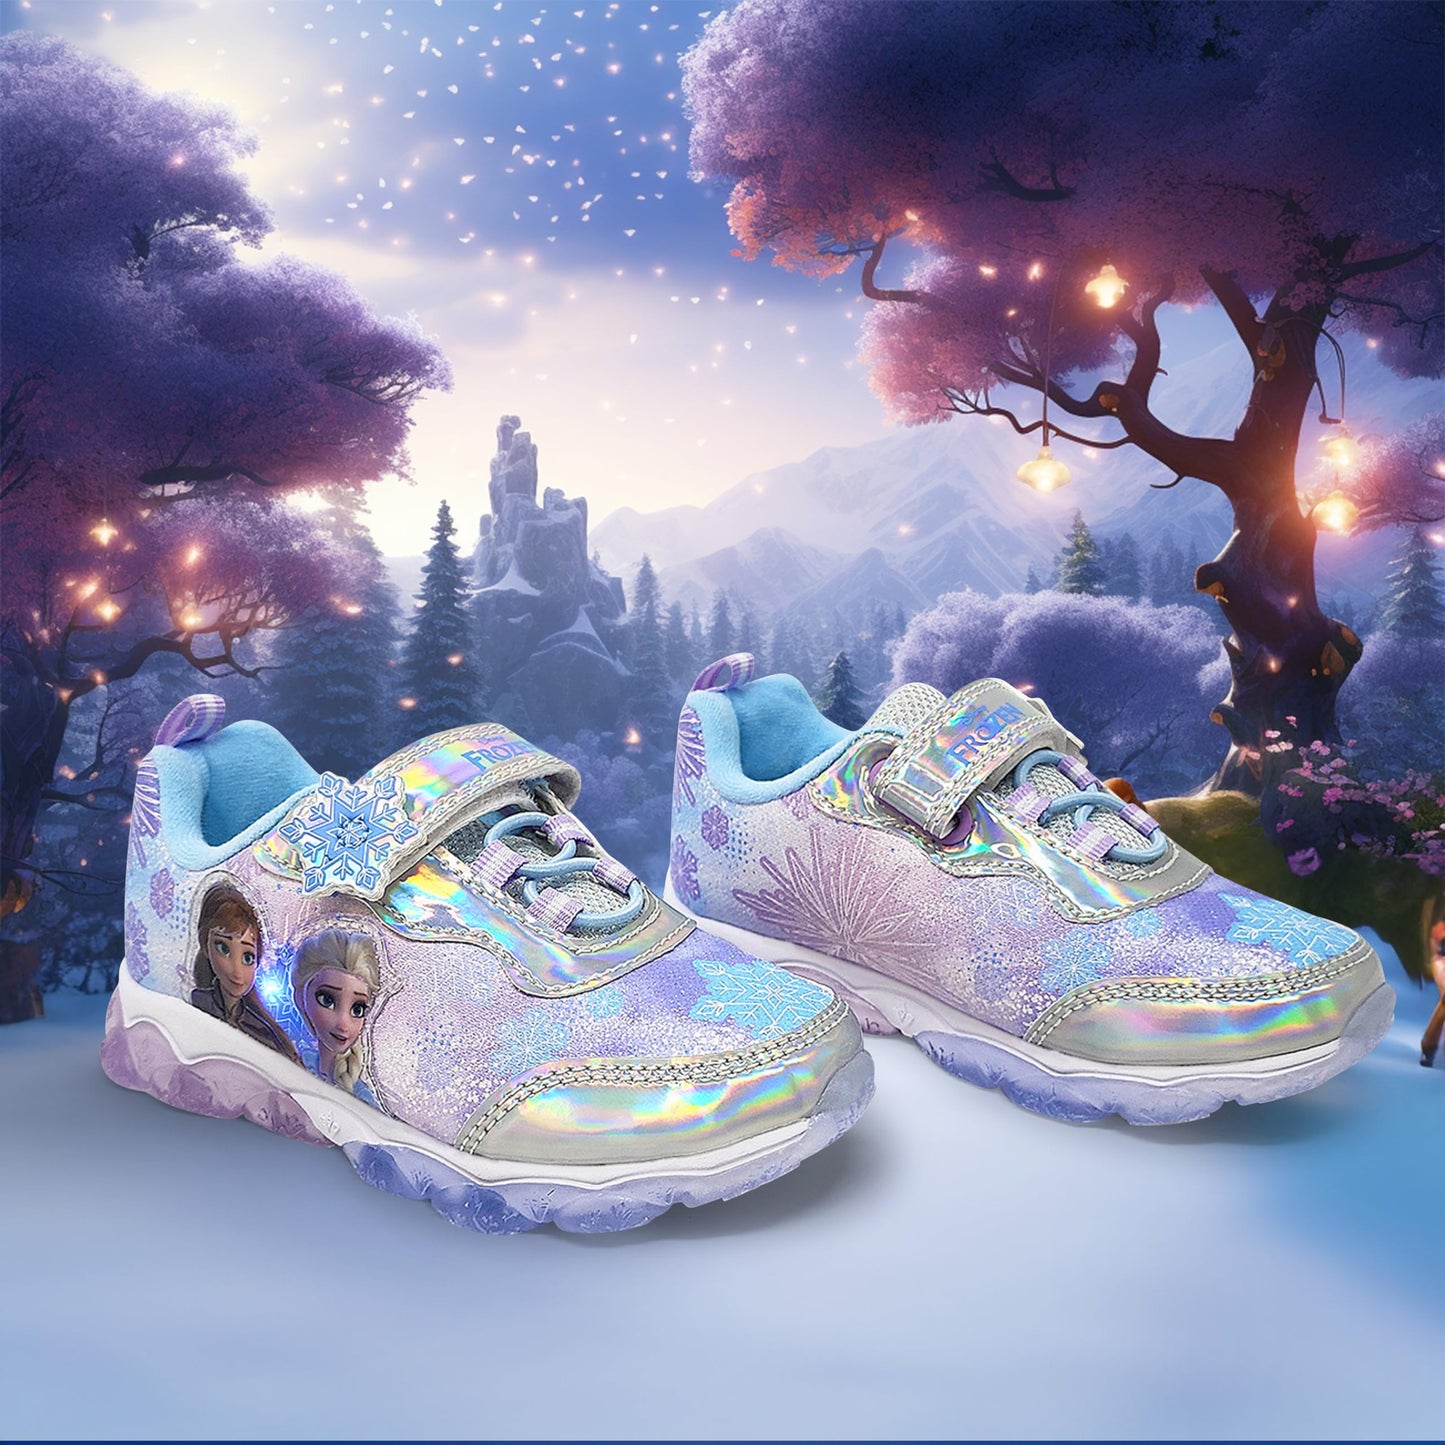 Disney Frozen Girl's Lighted Athletic Sneaker Elsa and Anna Light Up Shoes Children W/Adjustable Strap Silver/Blue